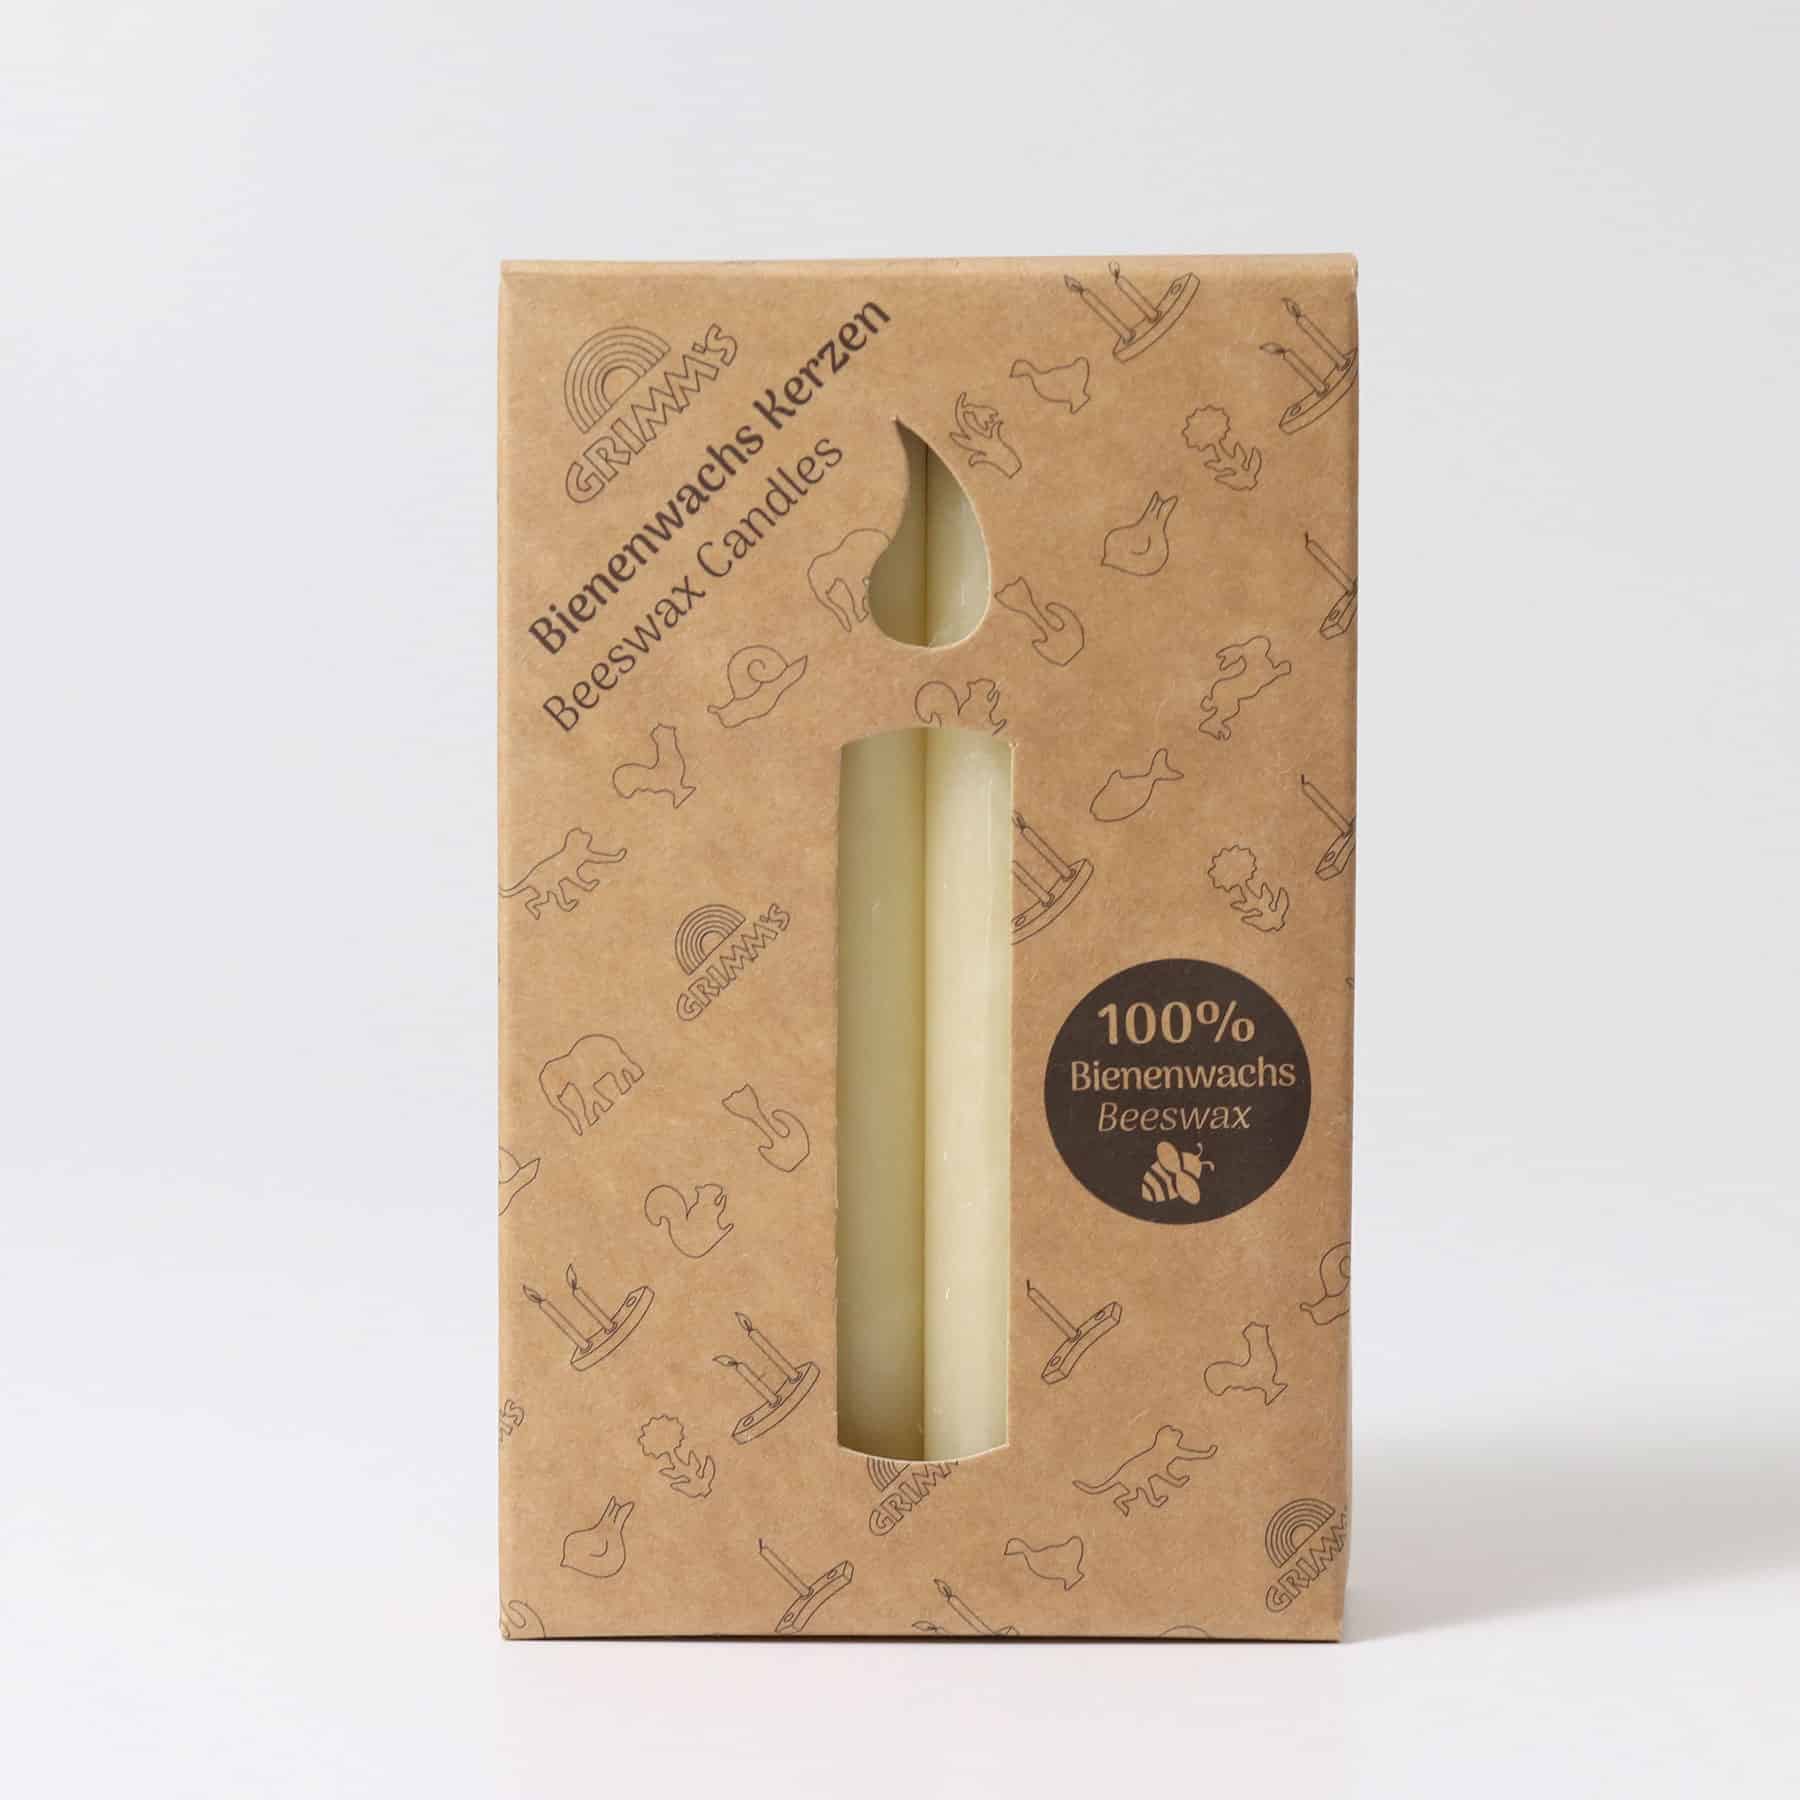 05201 Grimms Beeswax Candles - Creme (2)